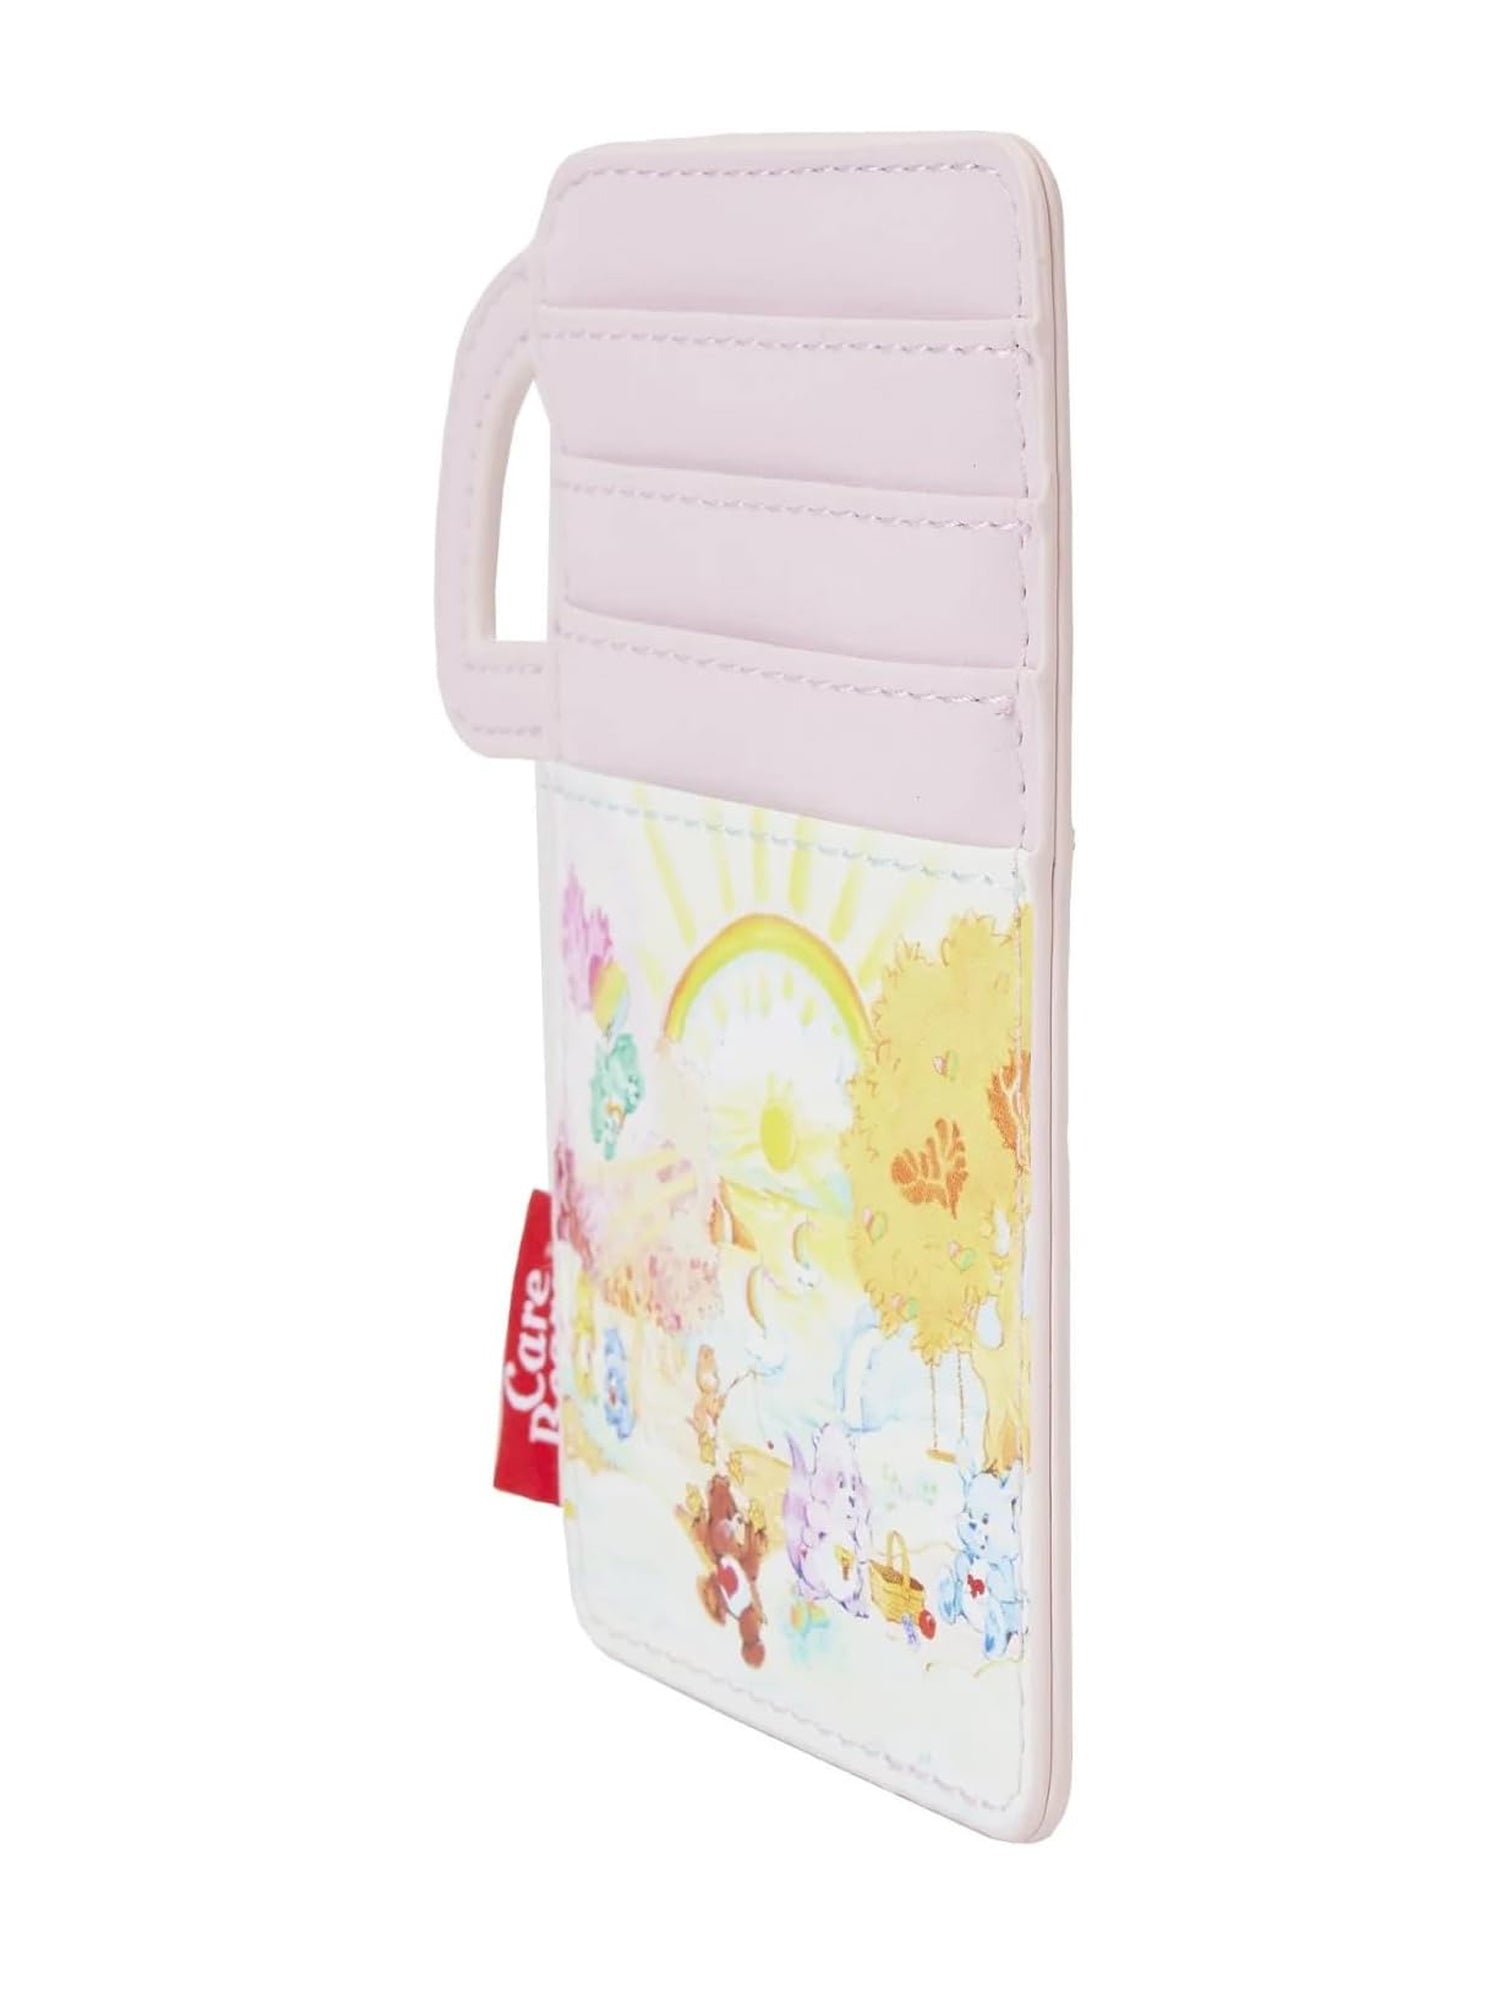 Loungefly x Care Bears Women's Card Holder Wallet Thermos